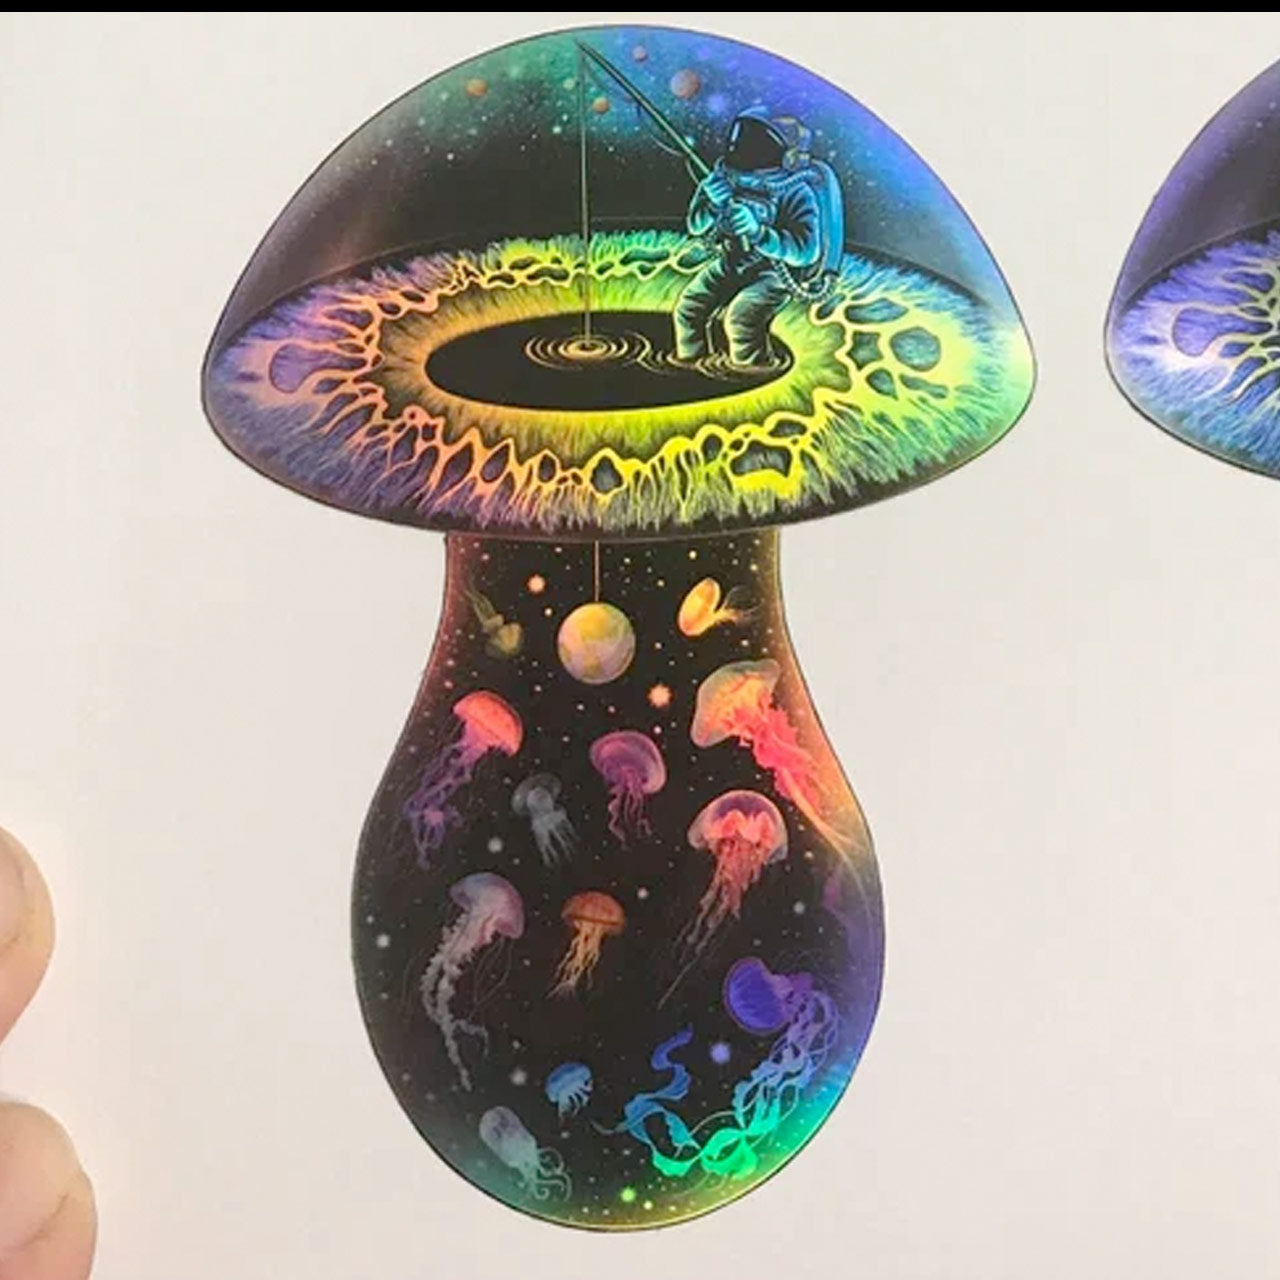 Tripping on Space Mushrooms |Shroomaniac| Psychedelic and Psytrance Mushroom Stickers